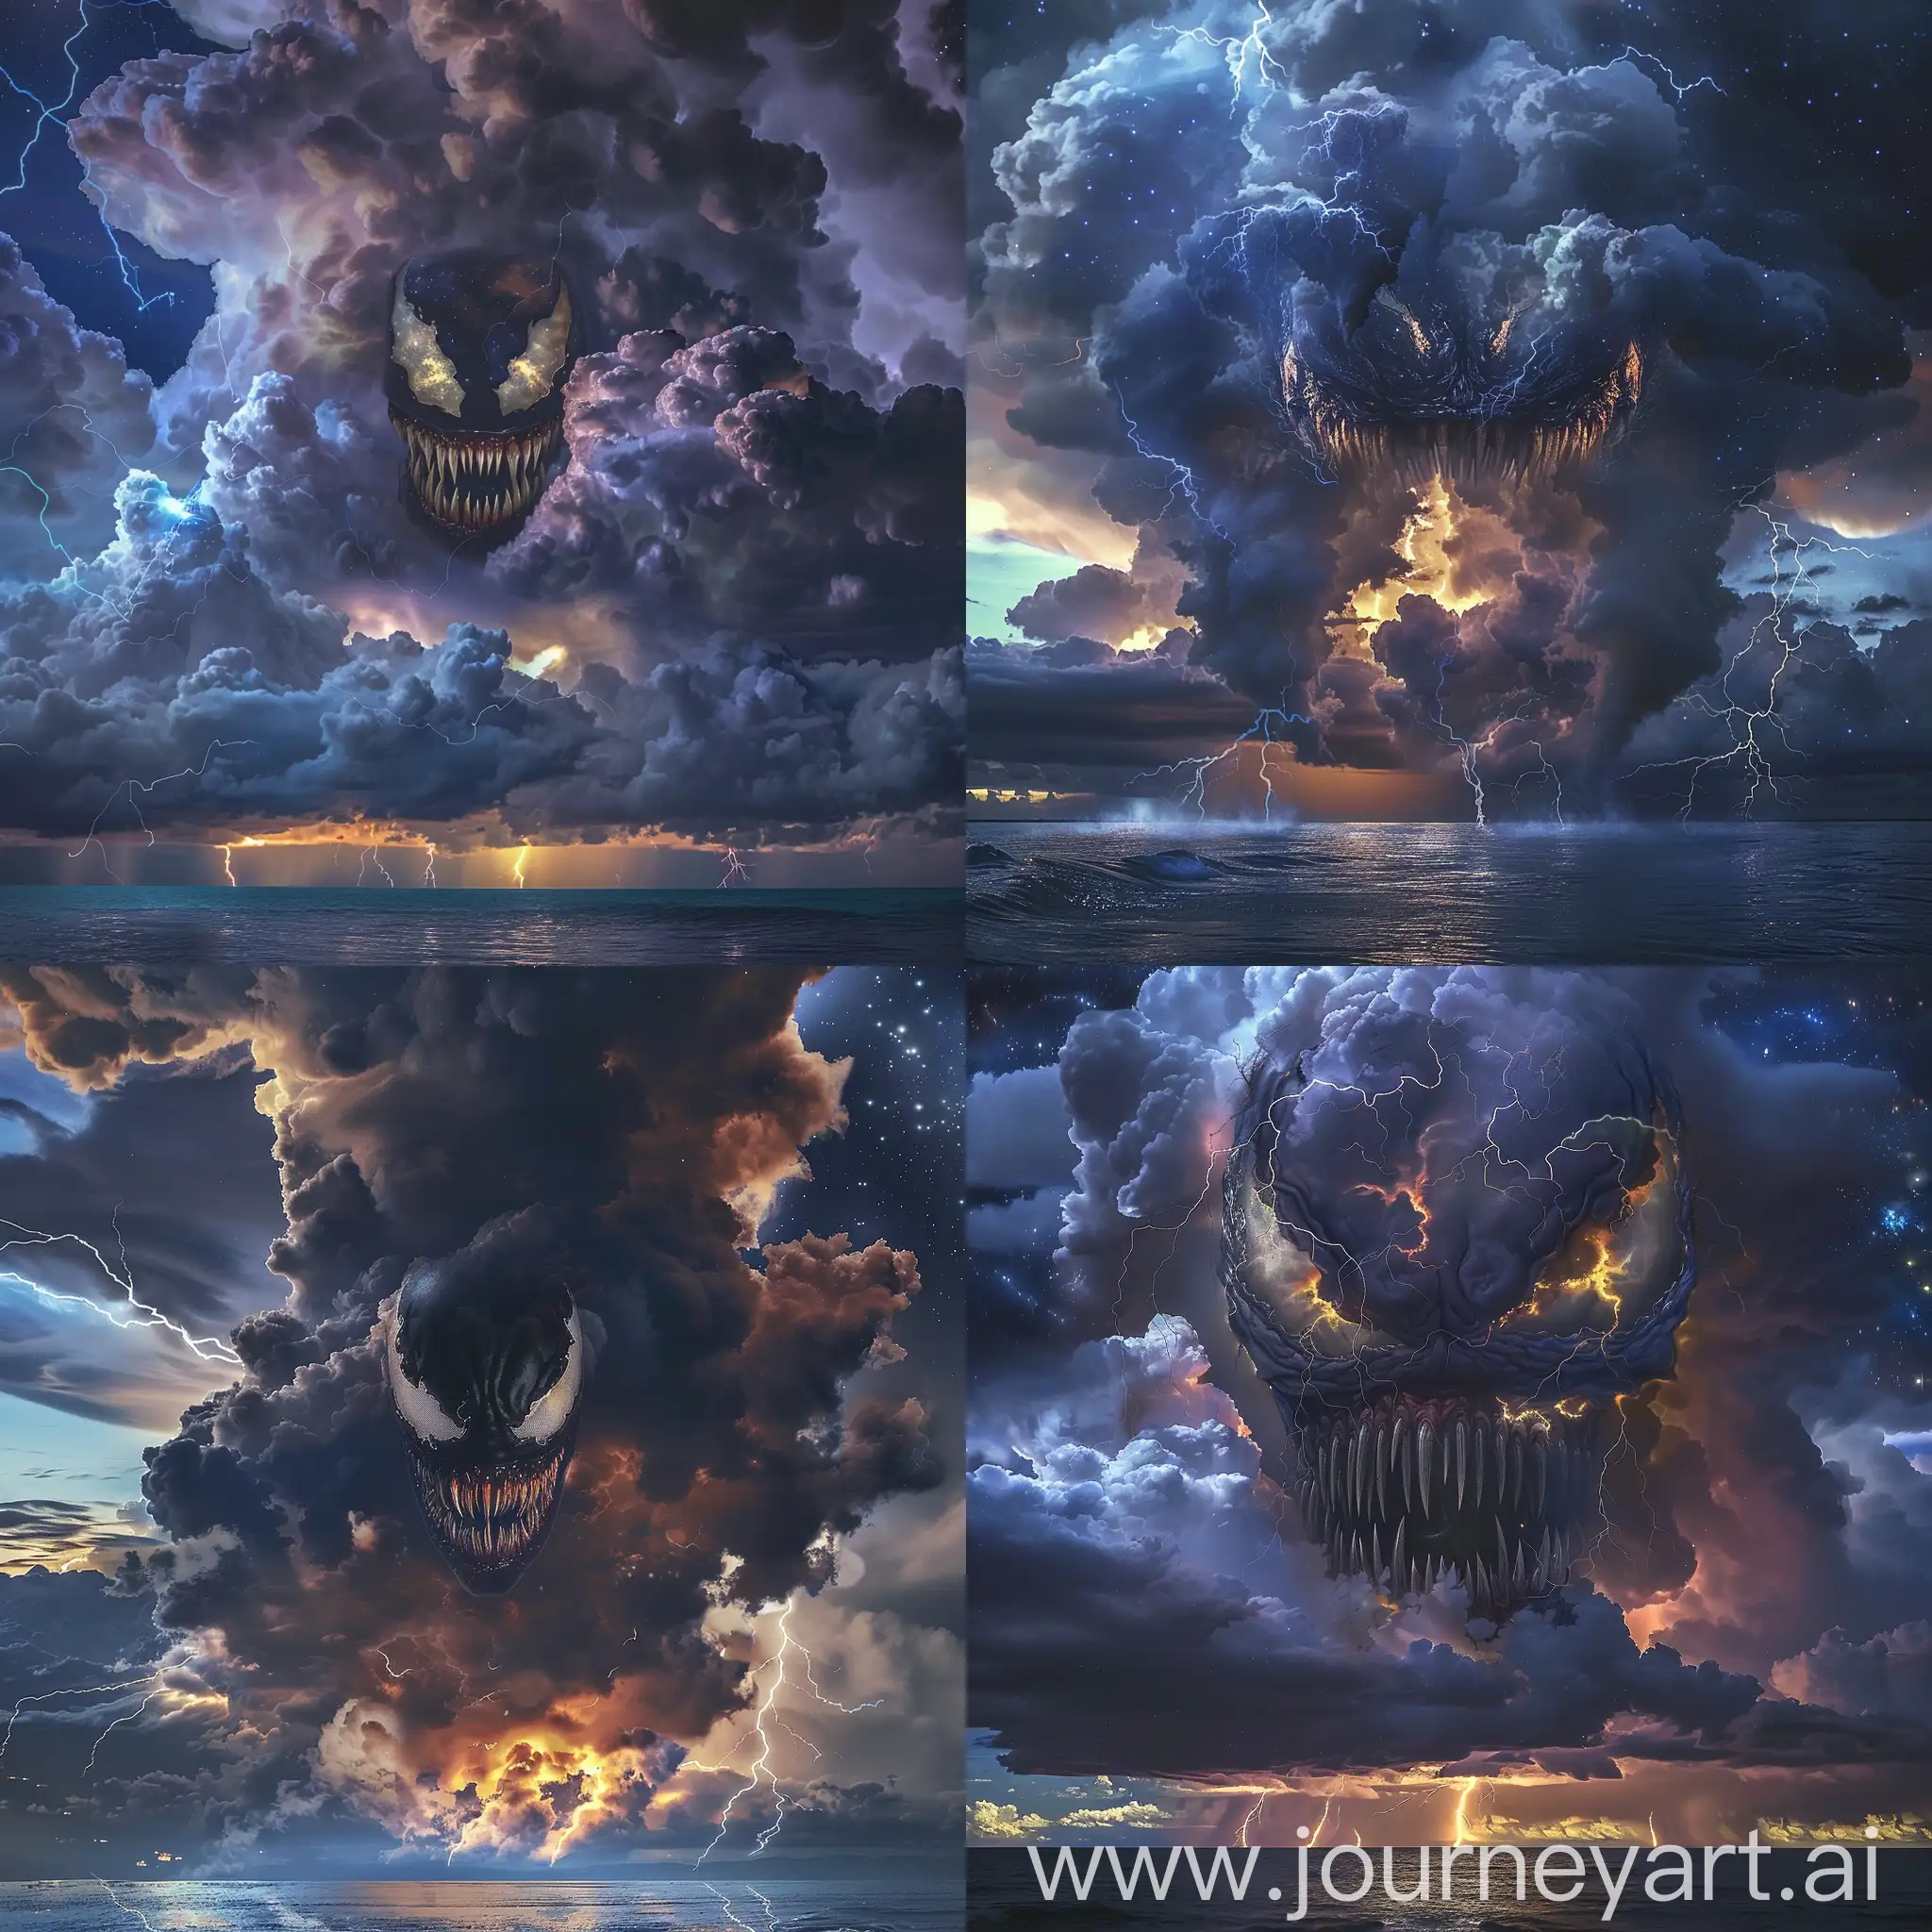 A breathtaking image of an impressive cloud formation reminiscent of Marvel's Venom. The clouds are dark and brooding, with vibrant details that bring Venom's face to life. Venom's eyes have a subtle glow that gives the image a mystical aura. The stormy sky is enlivened by flashes of lightning, enhancing the dramatic effect of the work. Below, the stormy ocean reflects lightning and stars in the sky, creating a stark contrast to the shadows cast by the clouds. This is a truly breathtaking and artistic image, combining the wildness of nature with a touch of surrealism.